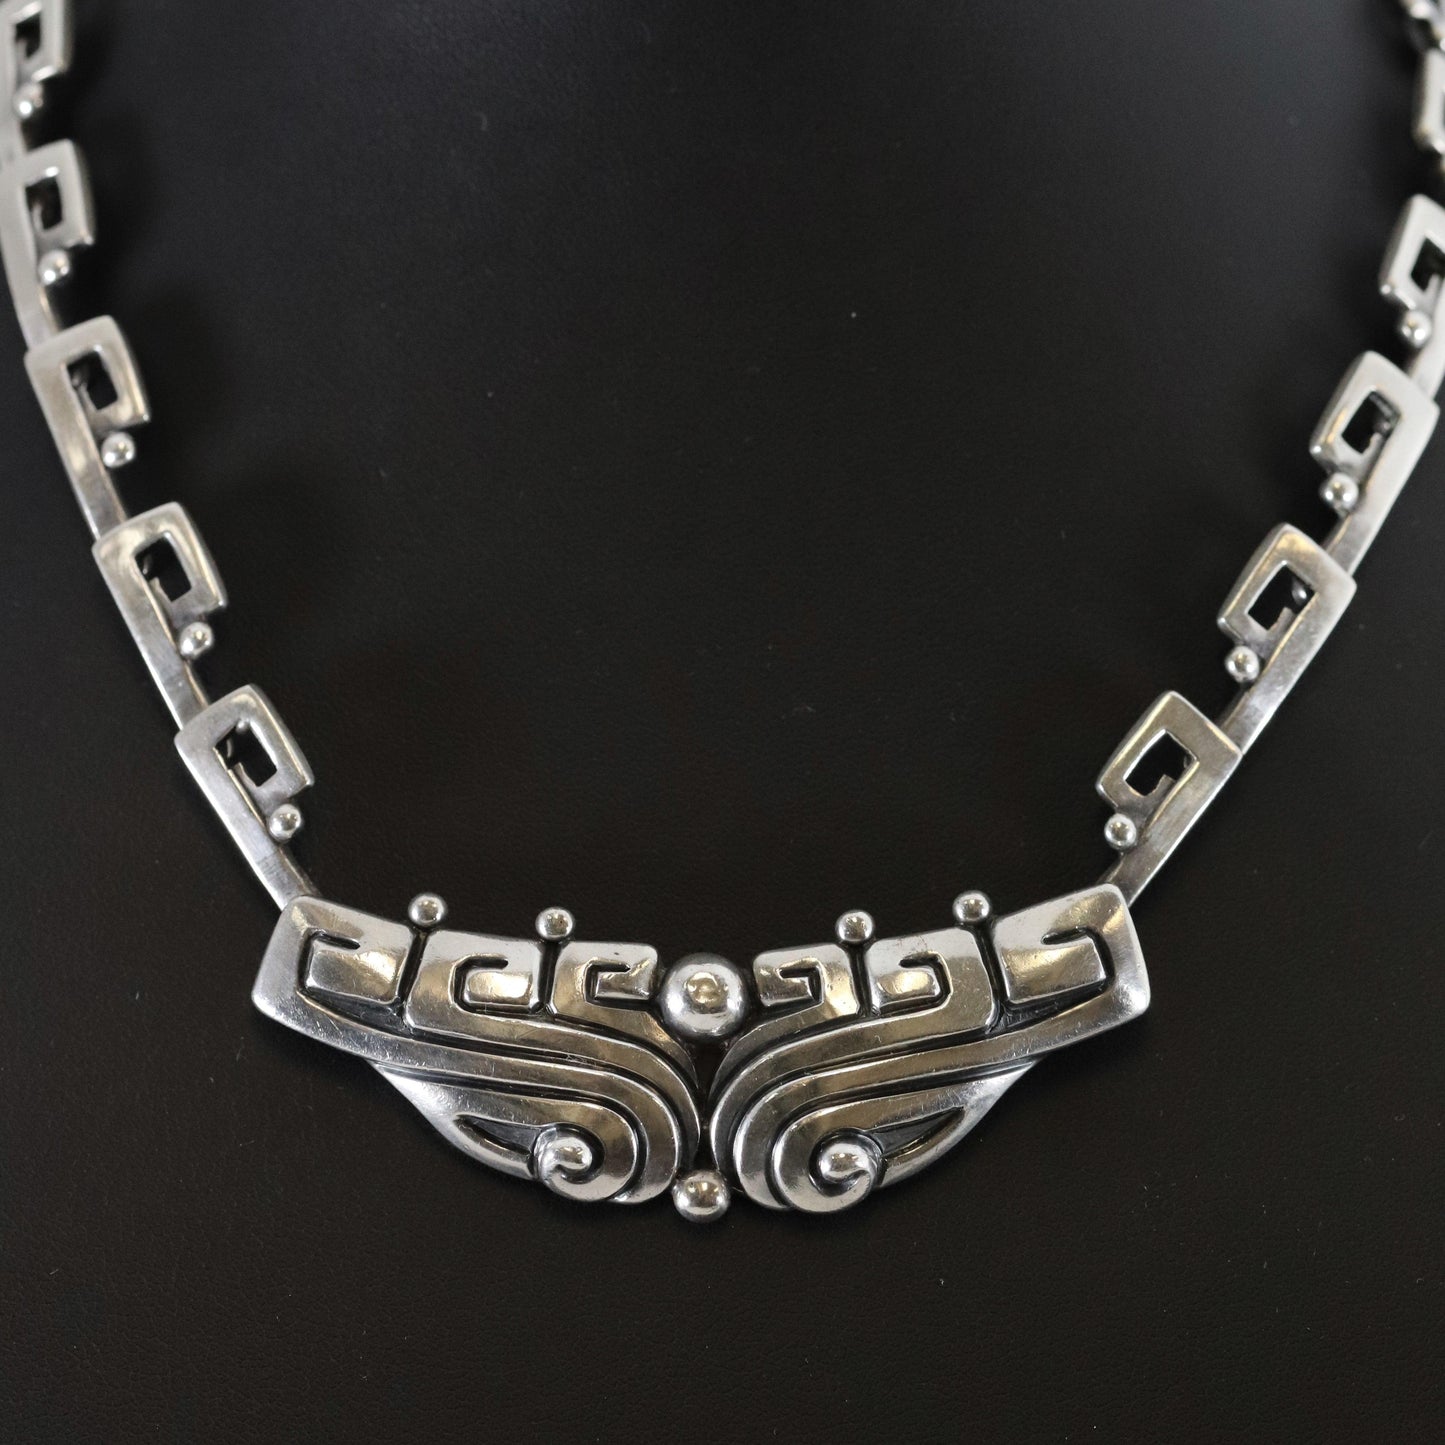 Vintage Margot de Taxco Silver Mexican Jewelry | Mid Century Pre-Columbian Inspired Necklace - Carmel Fine Silver Jewelry